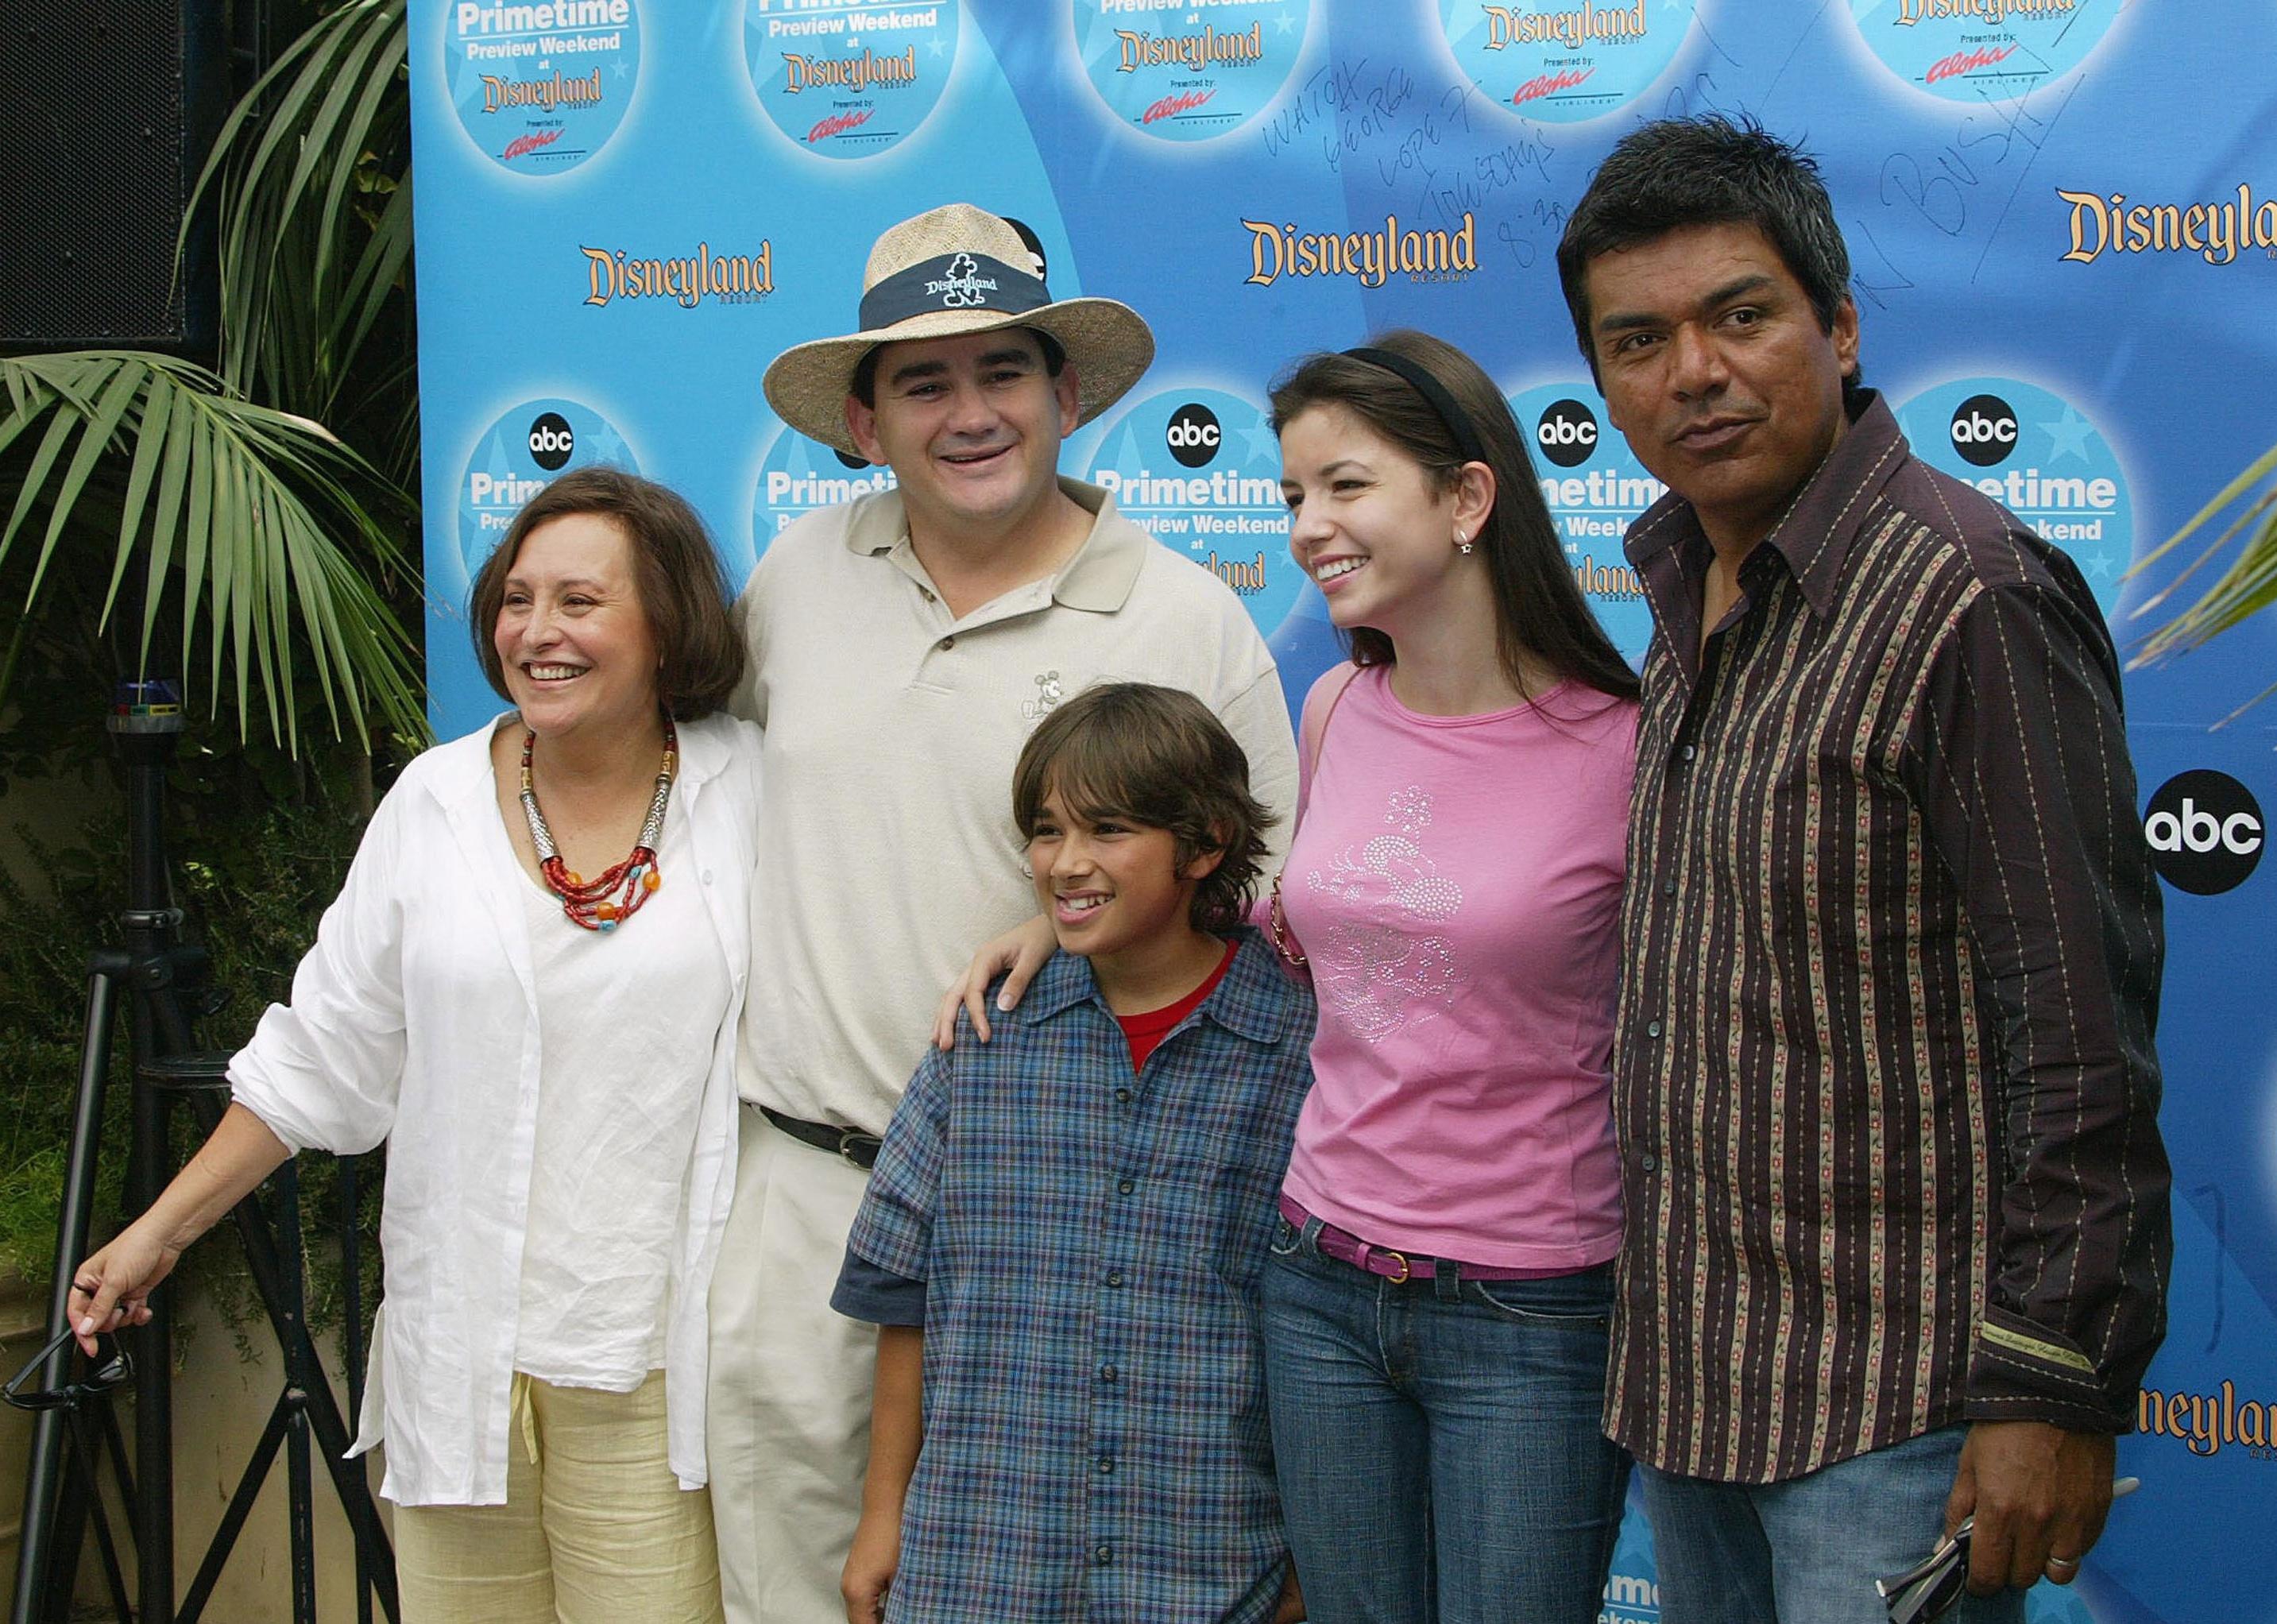 The cast of the "George Lopez Show"